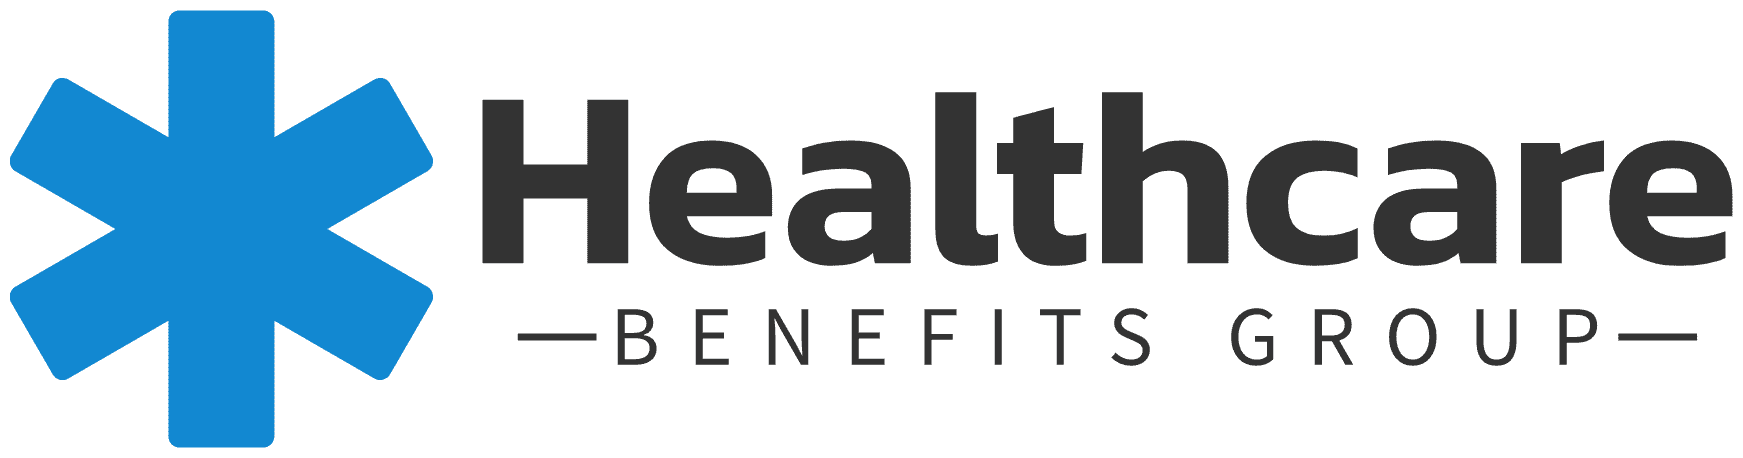 Healthcare Benefits Group